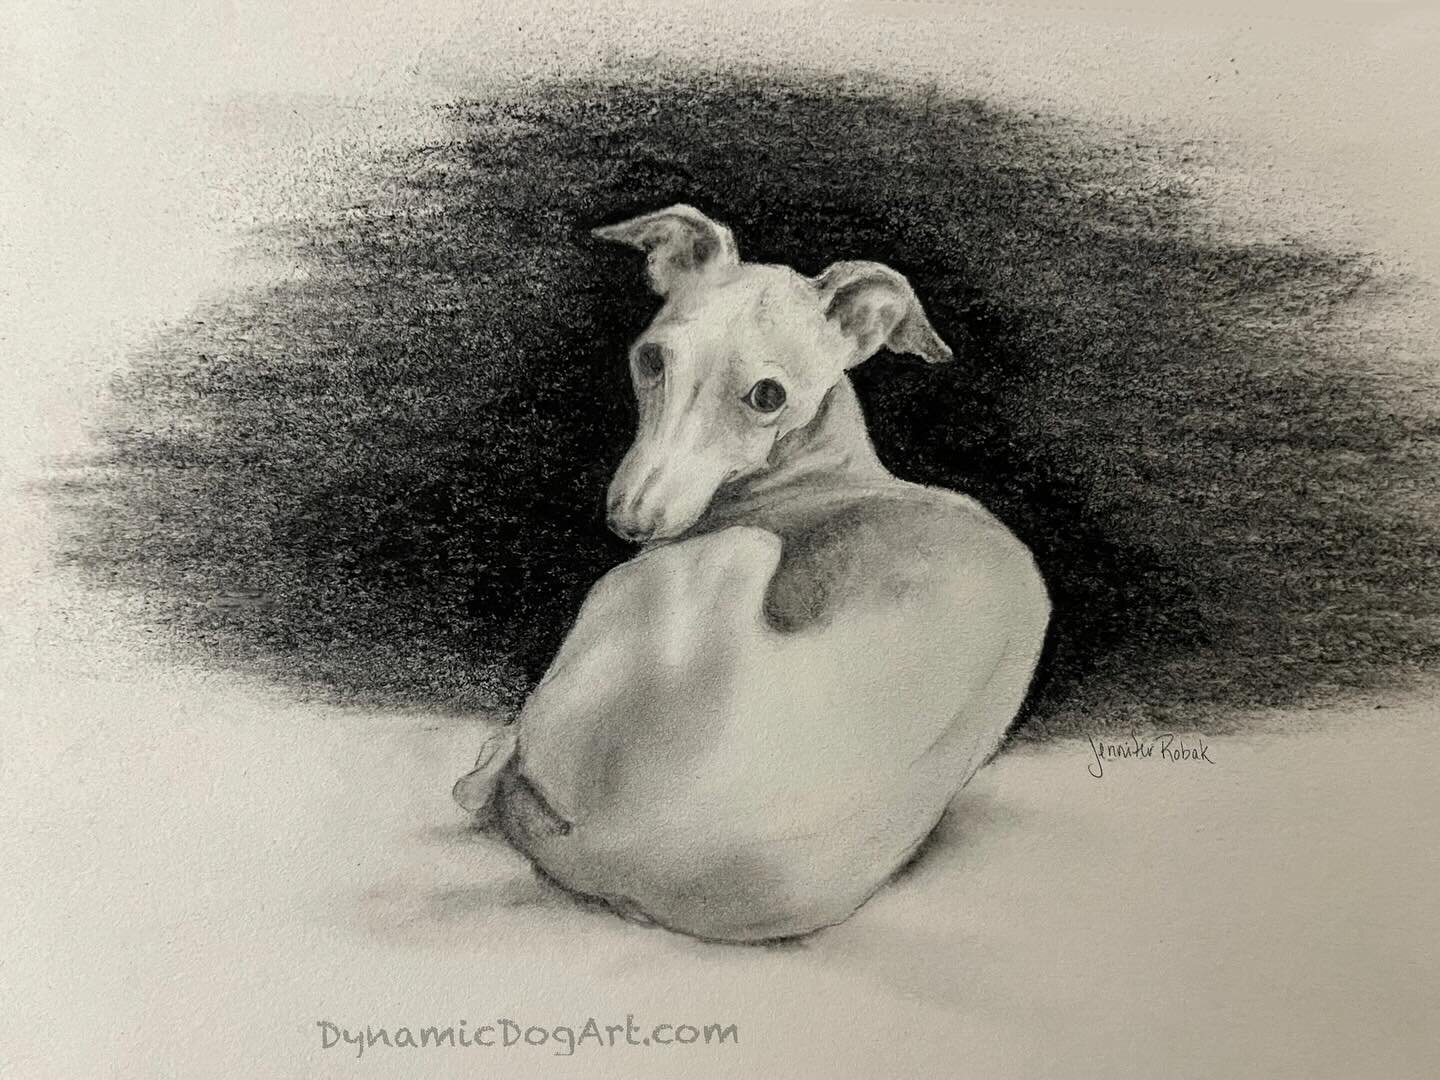 An Italian Greyhound, done in charcoal and pencil. 🐾🤍
I included some progression pictures, if you like to see how it came together. 

This was done from a photo posted by @little.iggy.olive 
I hope her mum doesn&rsquo;t mind that I used it. I just